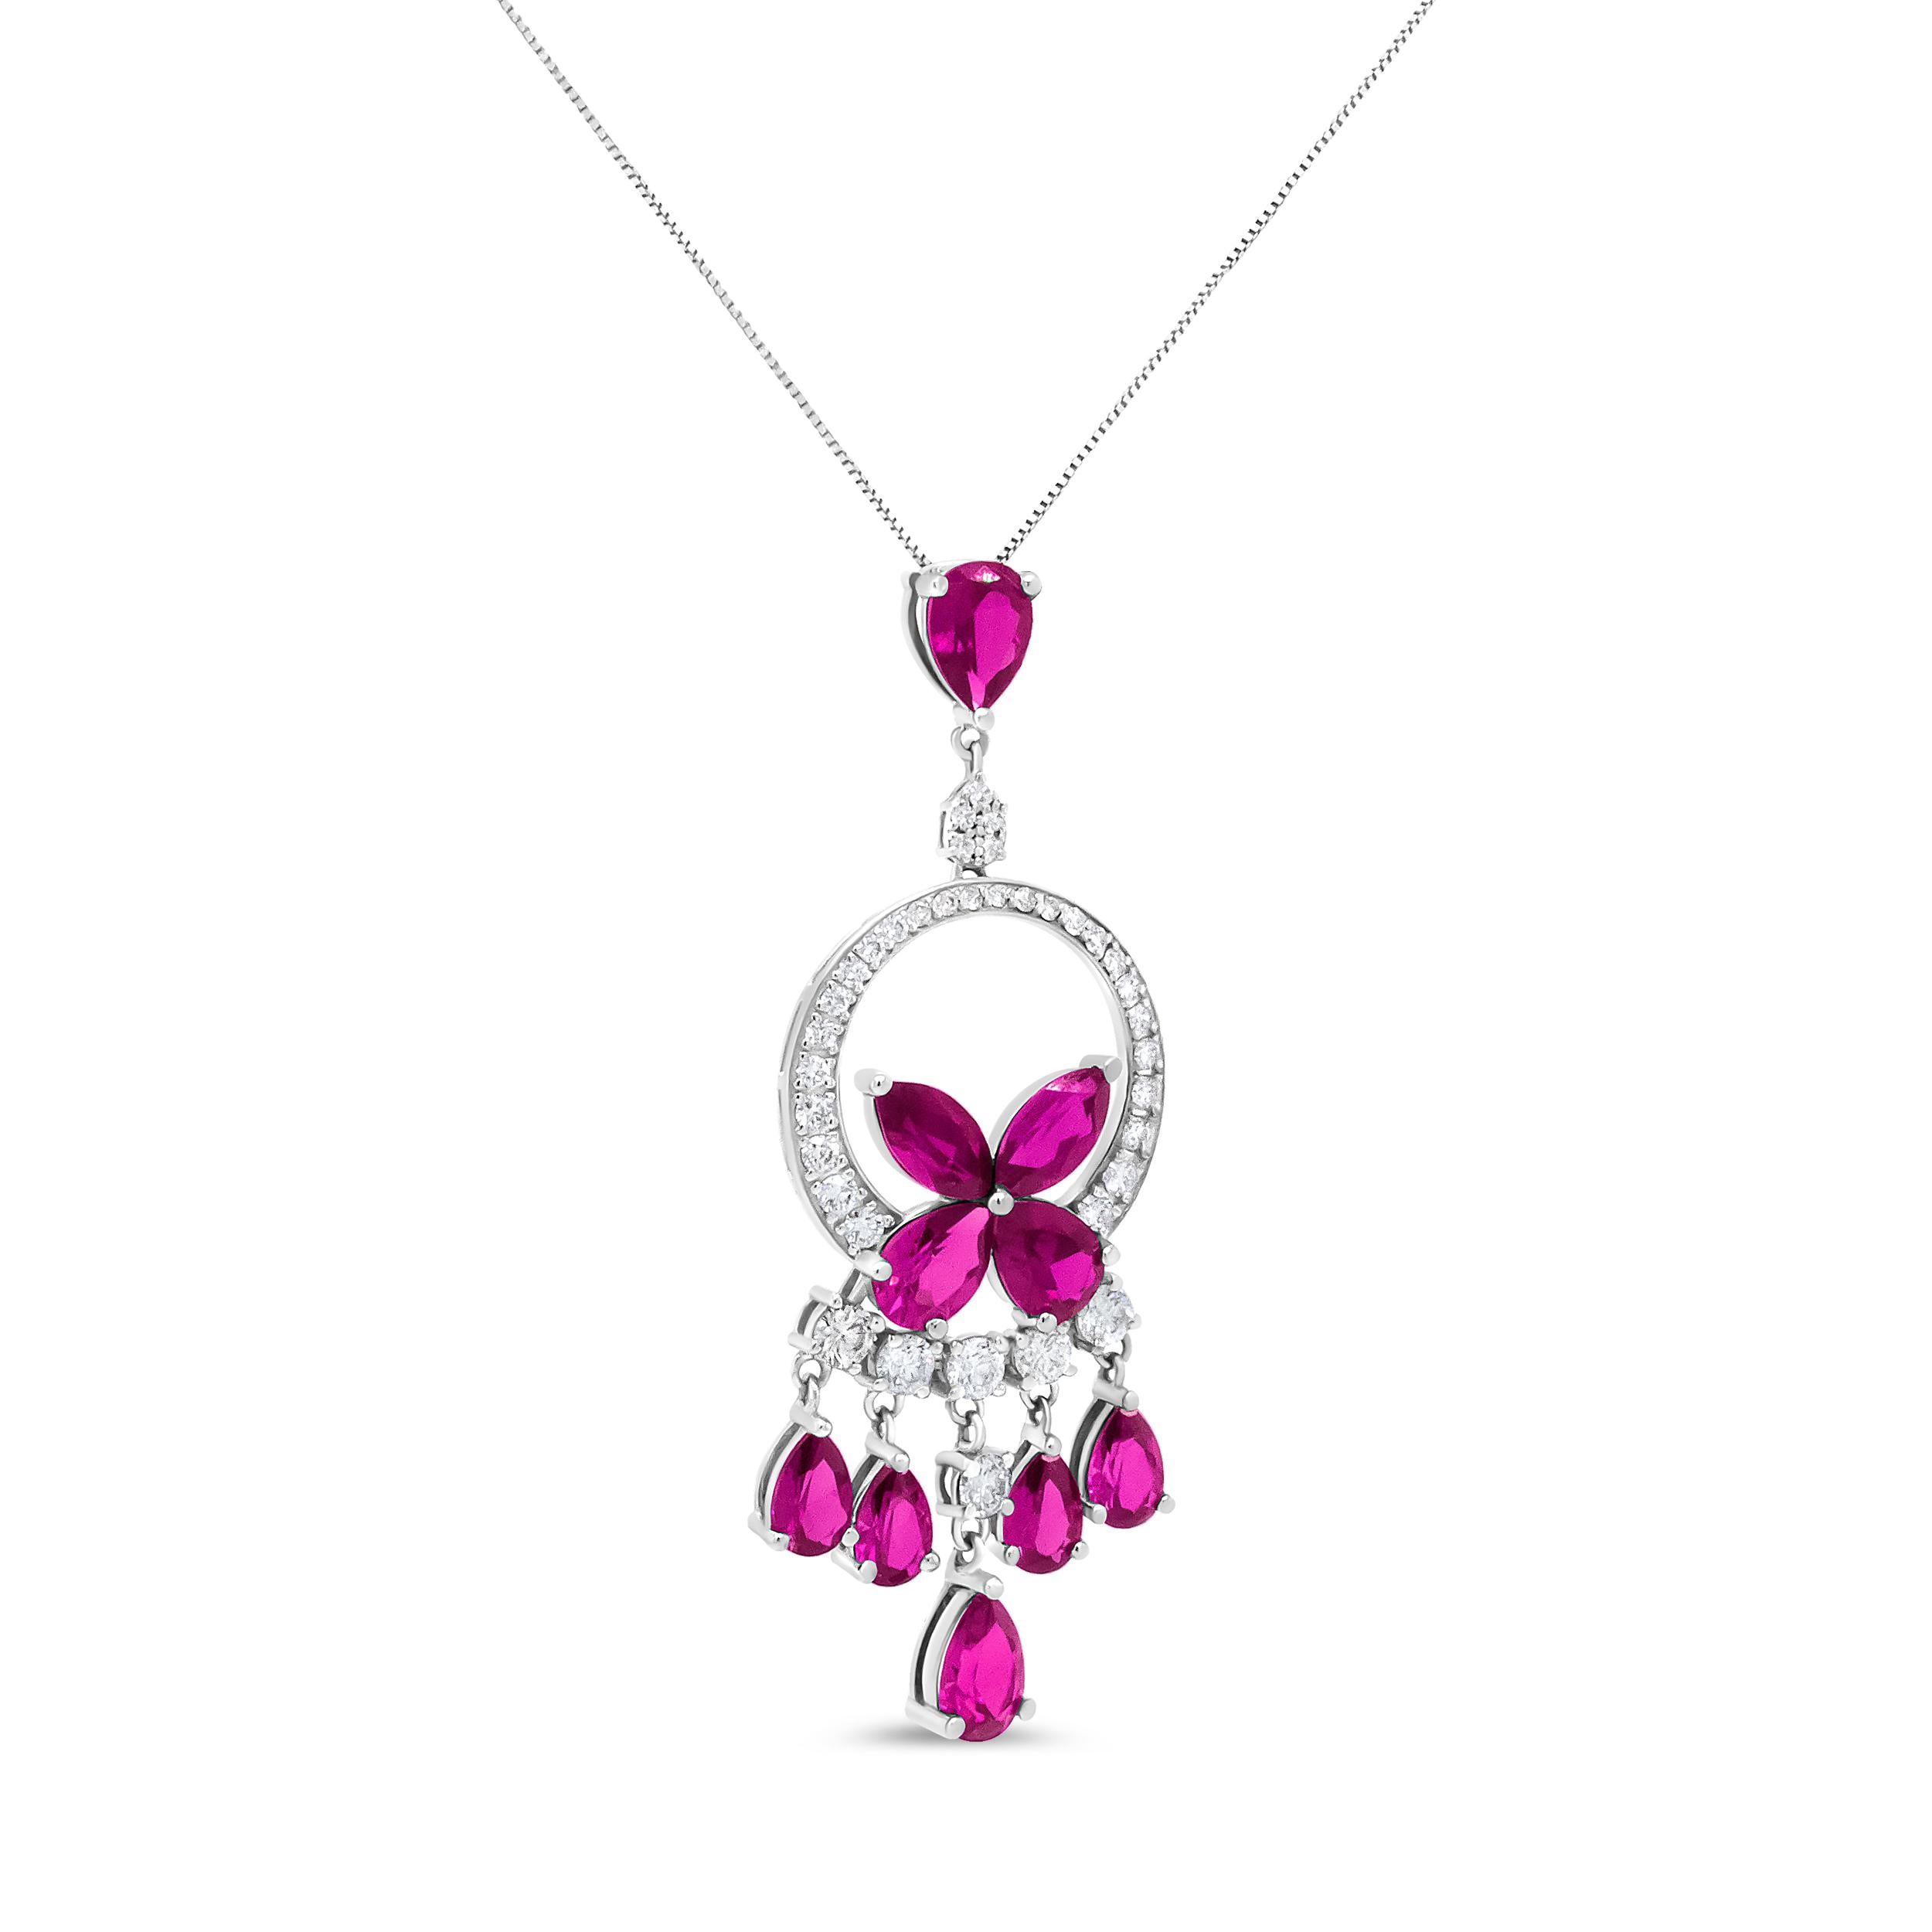 The glory of diamonds and gemstones emit a harmonious dose of sparkle in this gorgeous pendant necklace crafted from genuine 18k white gold. Round, white diamonds nestled in prong settings enthrall with their gleaming beauty in a total 1.00 cttw